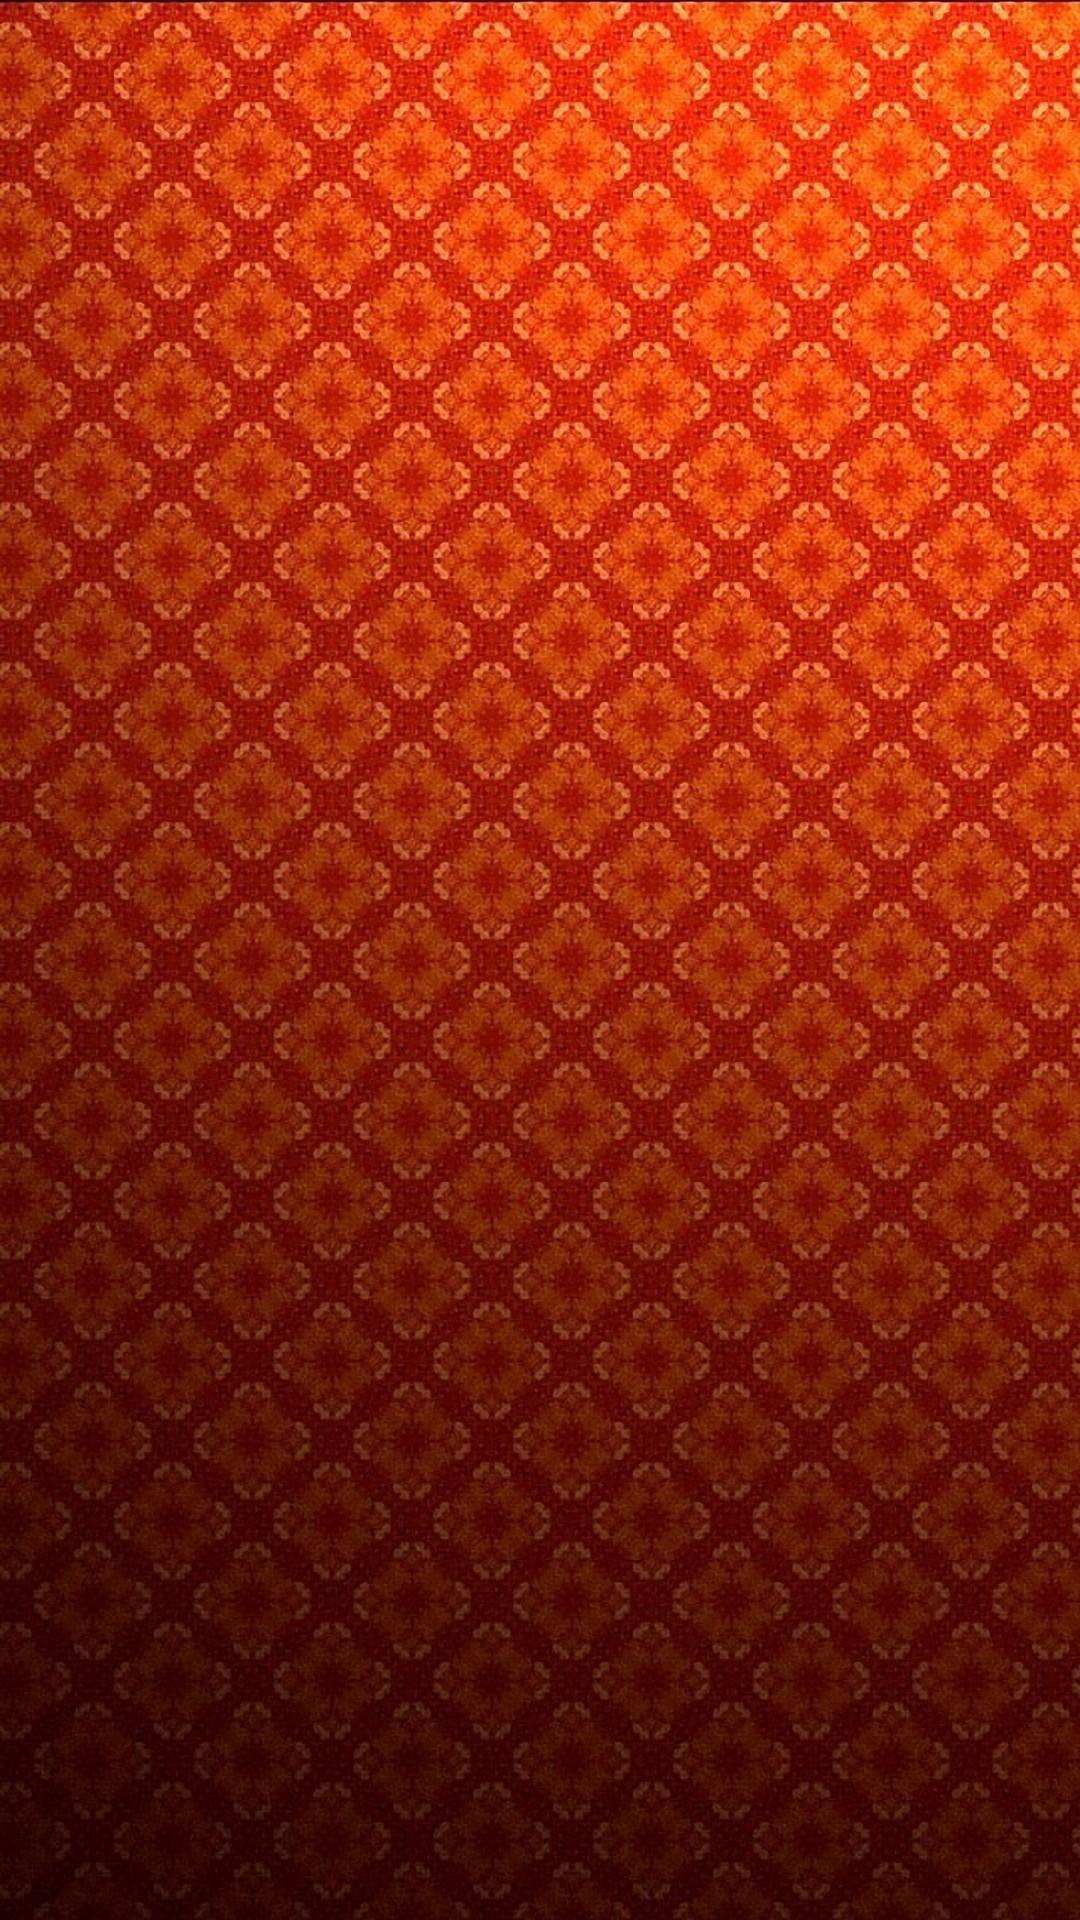 Orange Android Wallpapers - Wallpaper Cave